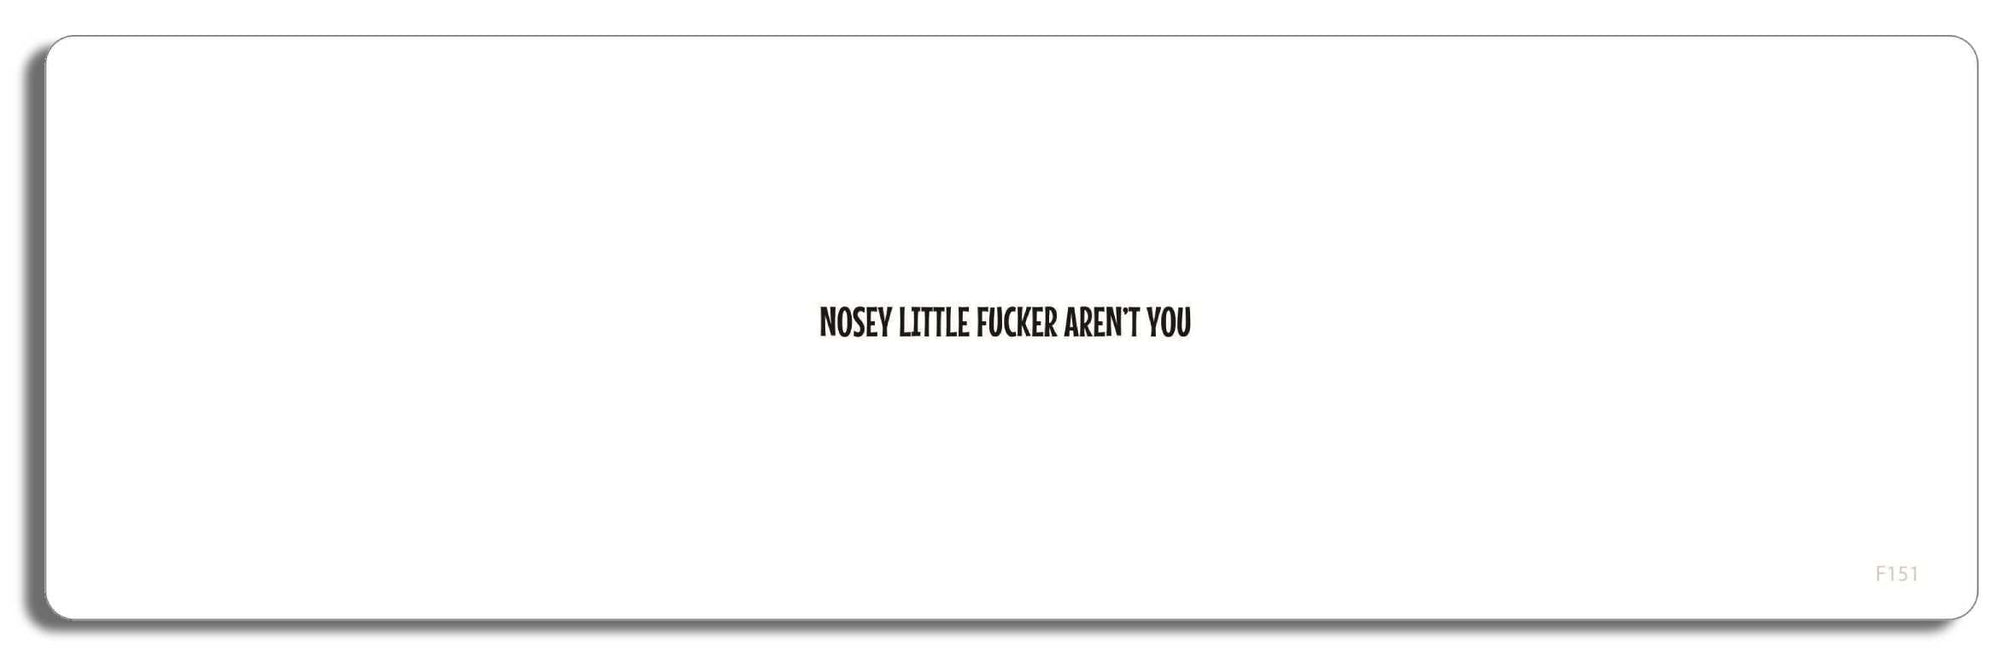 Nosey little fucker aren't you - 3" x 10" Bumper Sticker--Car Magnet- -  Decal Bumper Sticker-funny Bumper Sticker Car Magnet Nosey little fucker aren't you-  Decal for cars funny, funny quote, funny saying